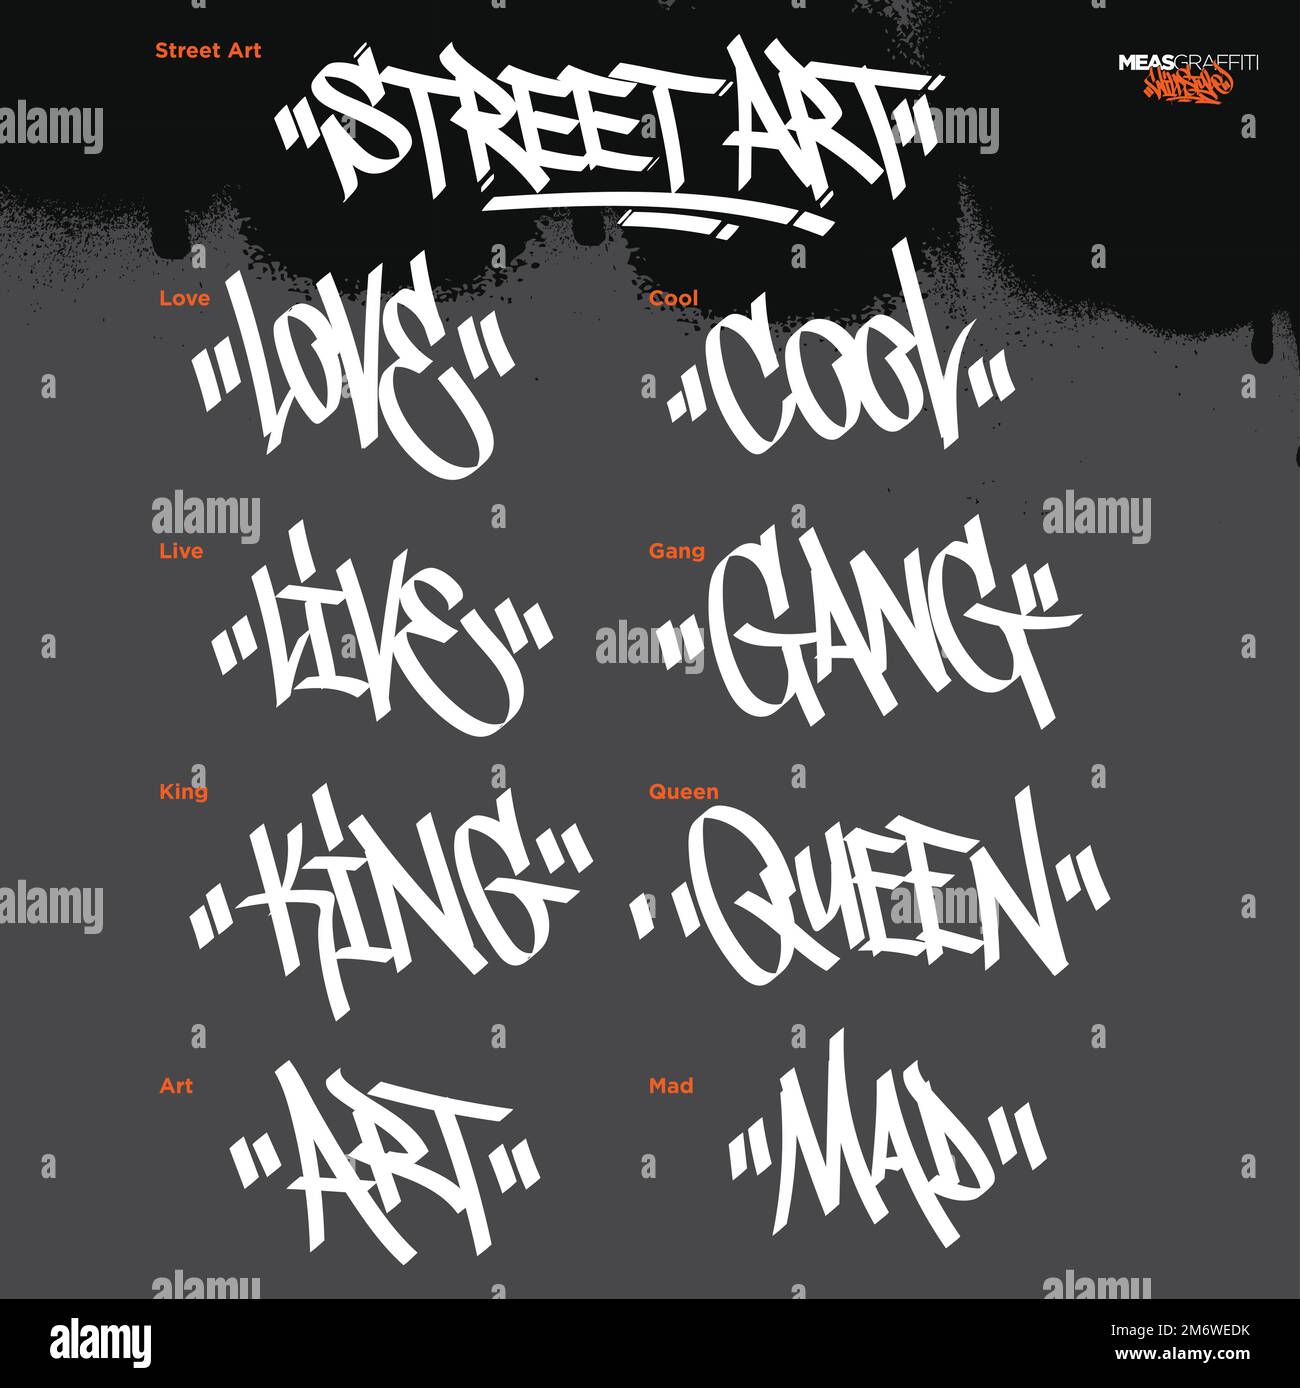 Various words in a cool street art graffiti tags Stock Vector